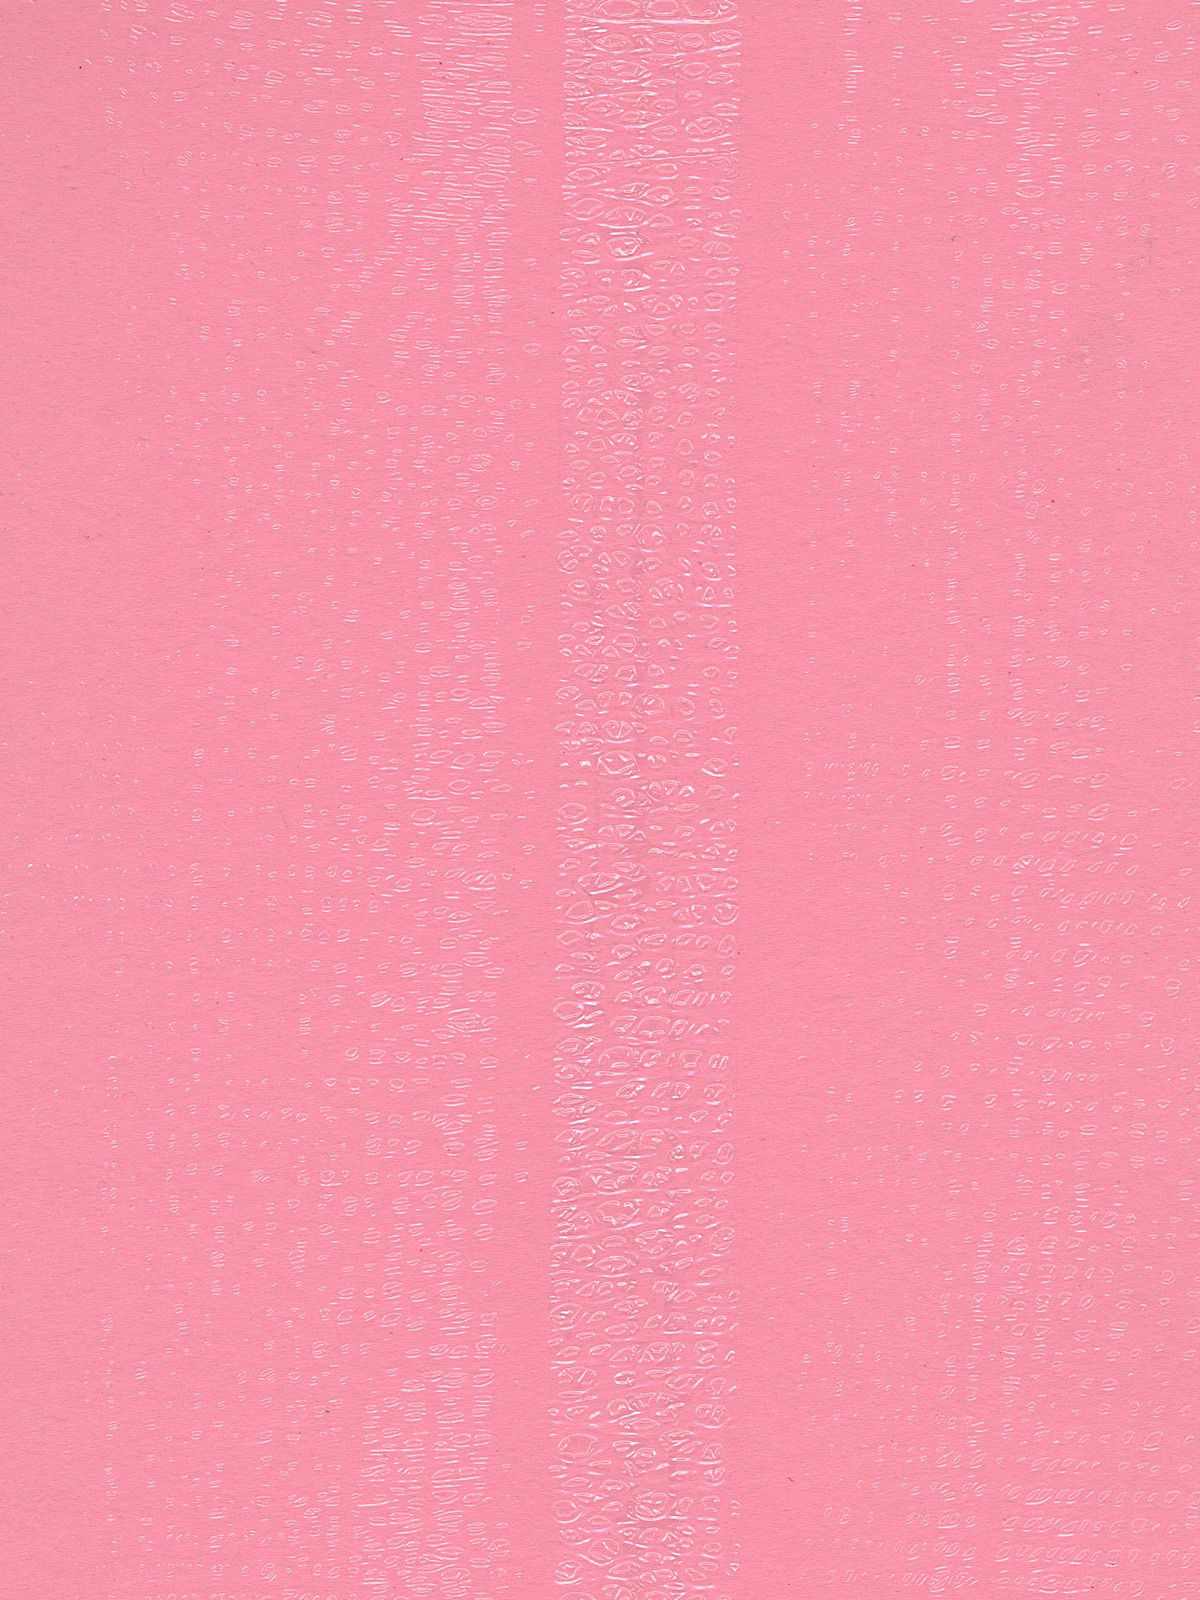 Pacon SunWorks Hot Pink Construction Paper, 12 x 9, 50 Sheets